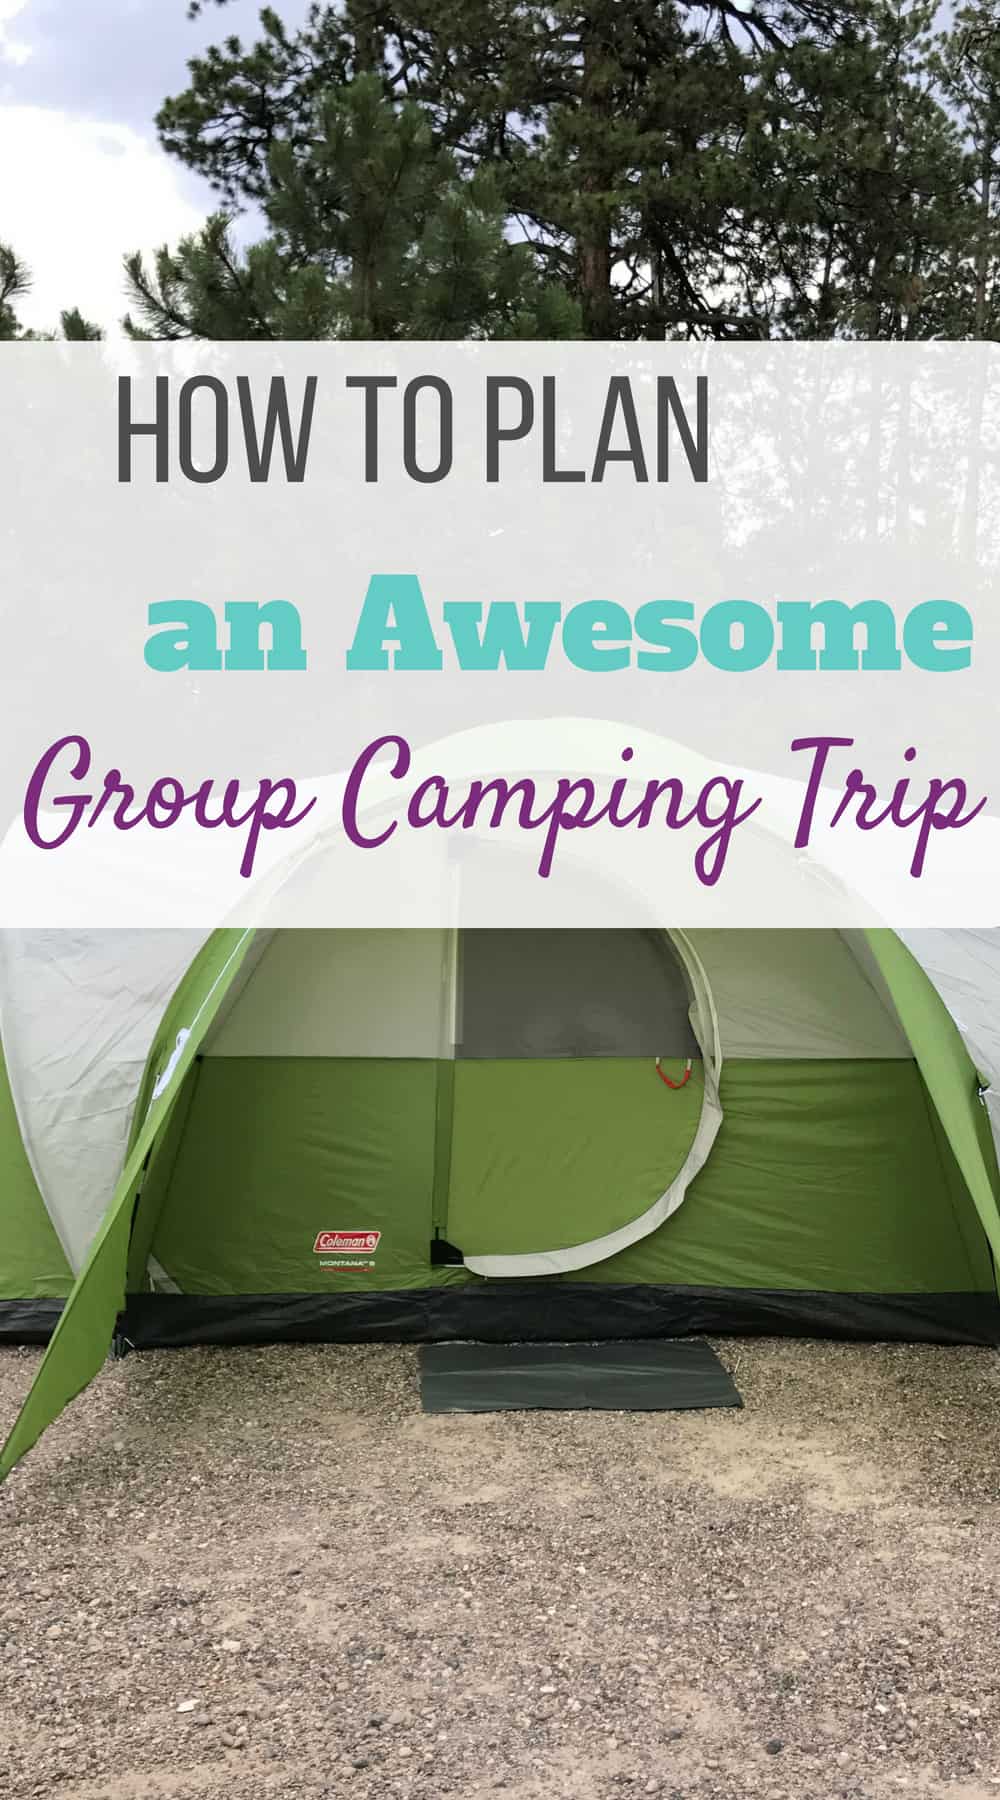 How To Plan An Awesome Group Camping Trip - Miss Sue Living